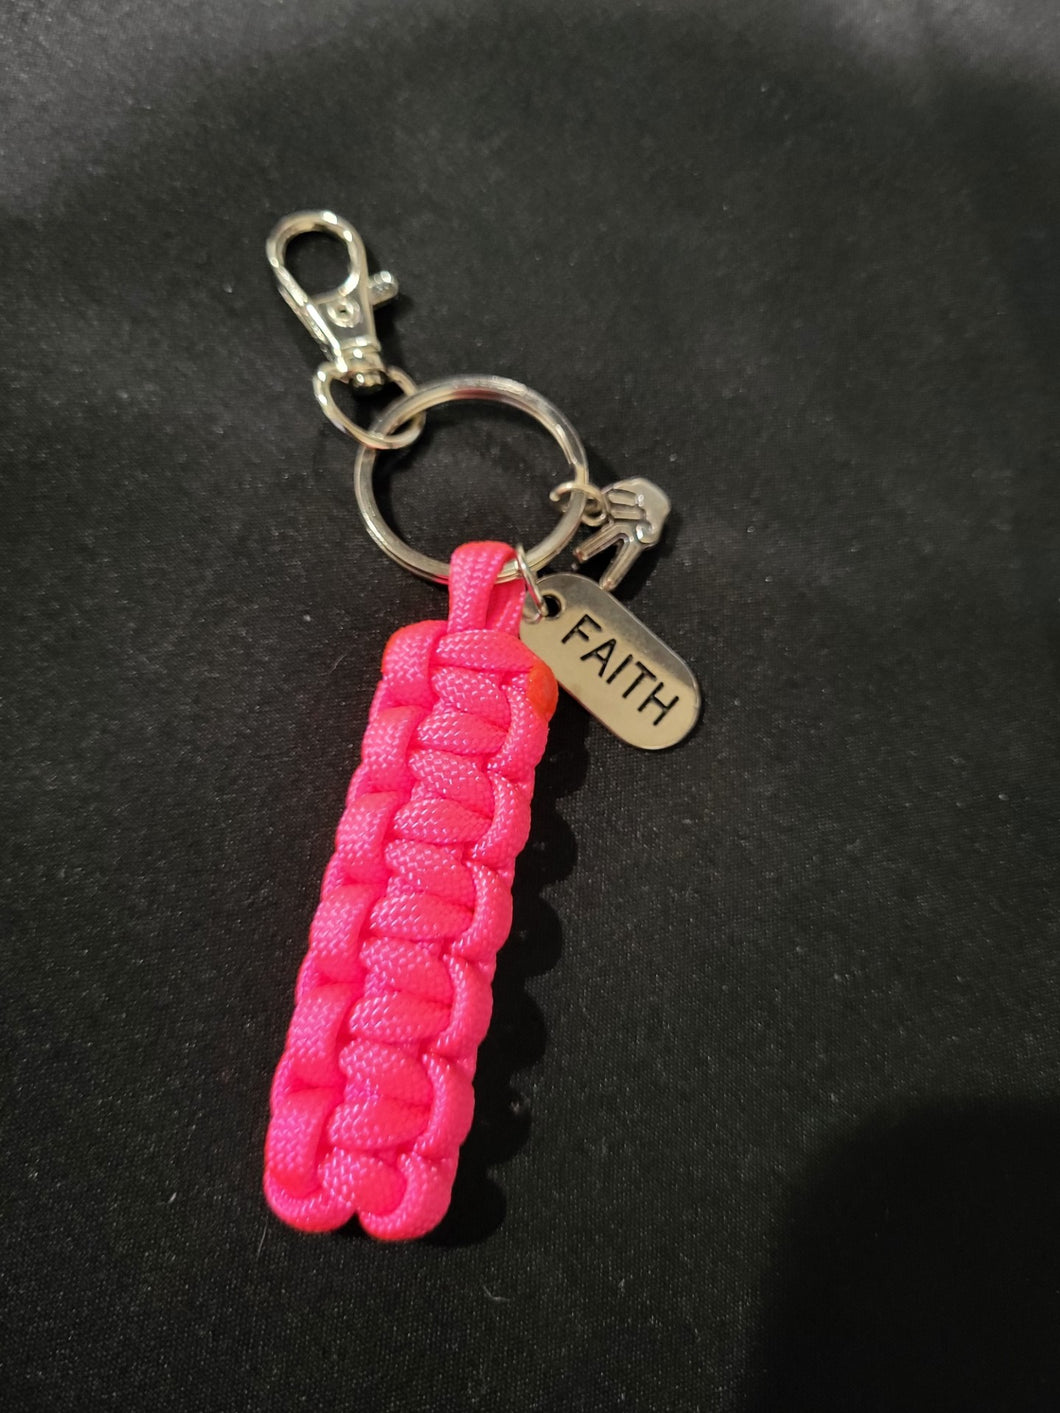 Paracord Key Chain- Bright Pink with Faith Charms